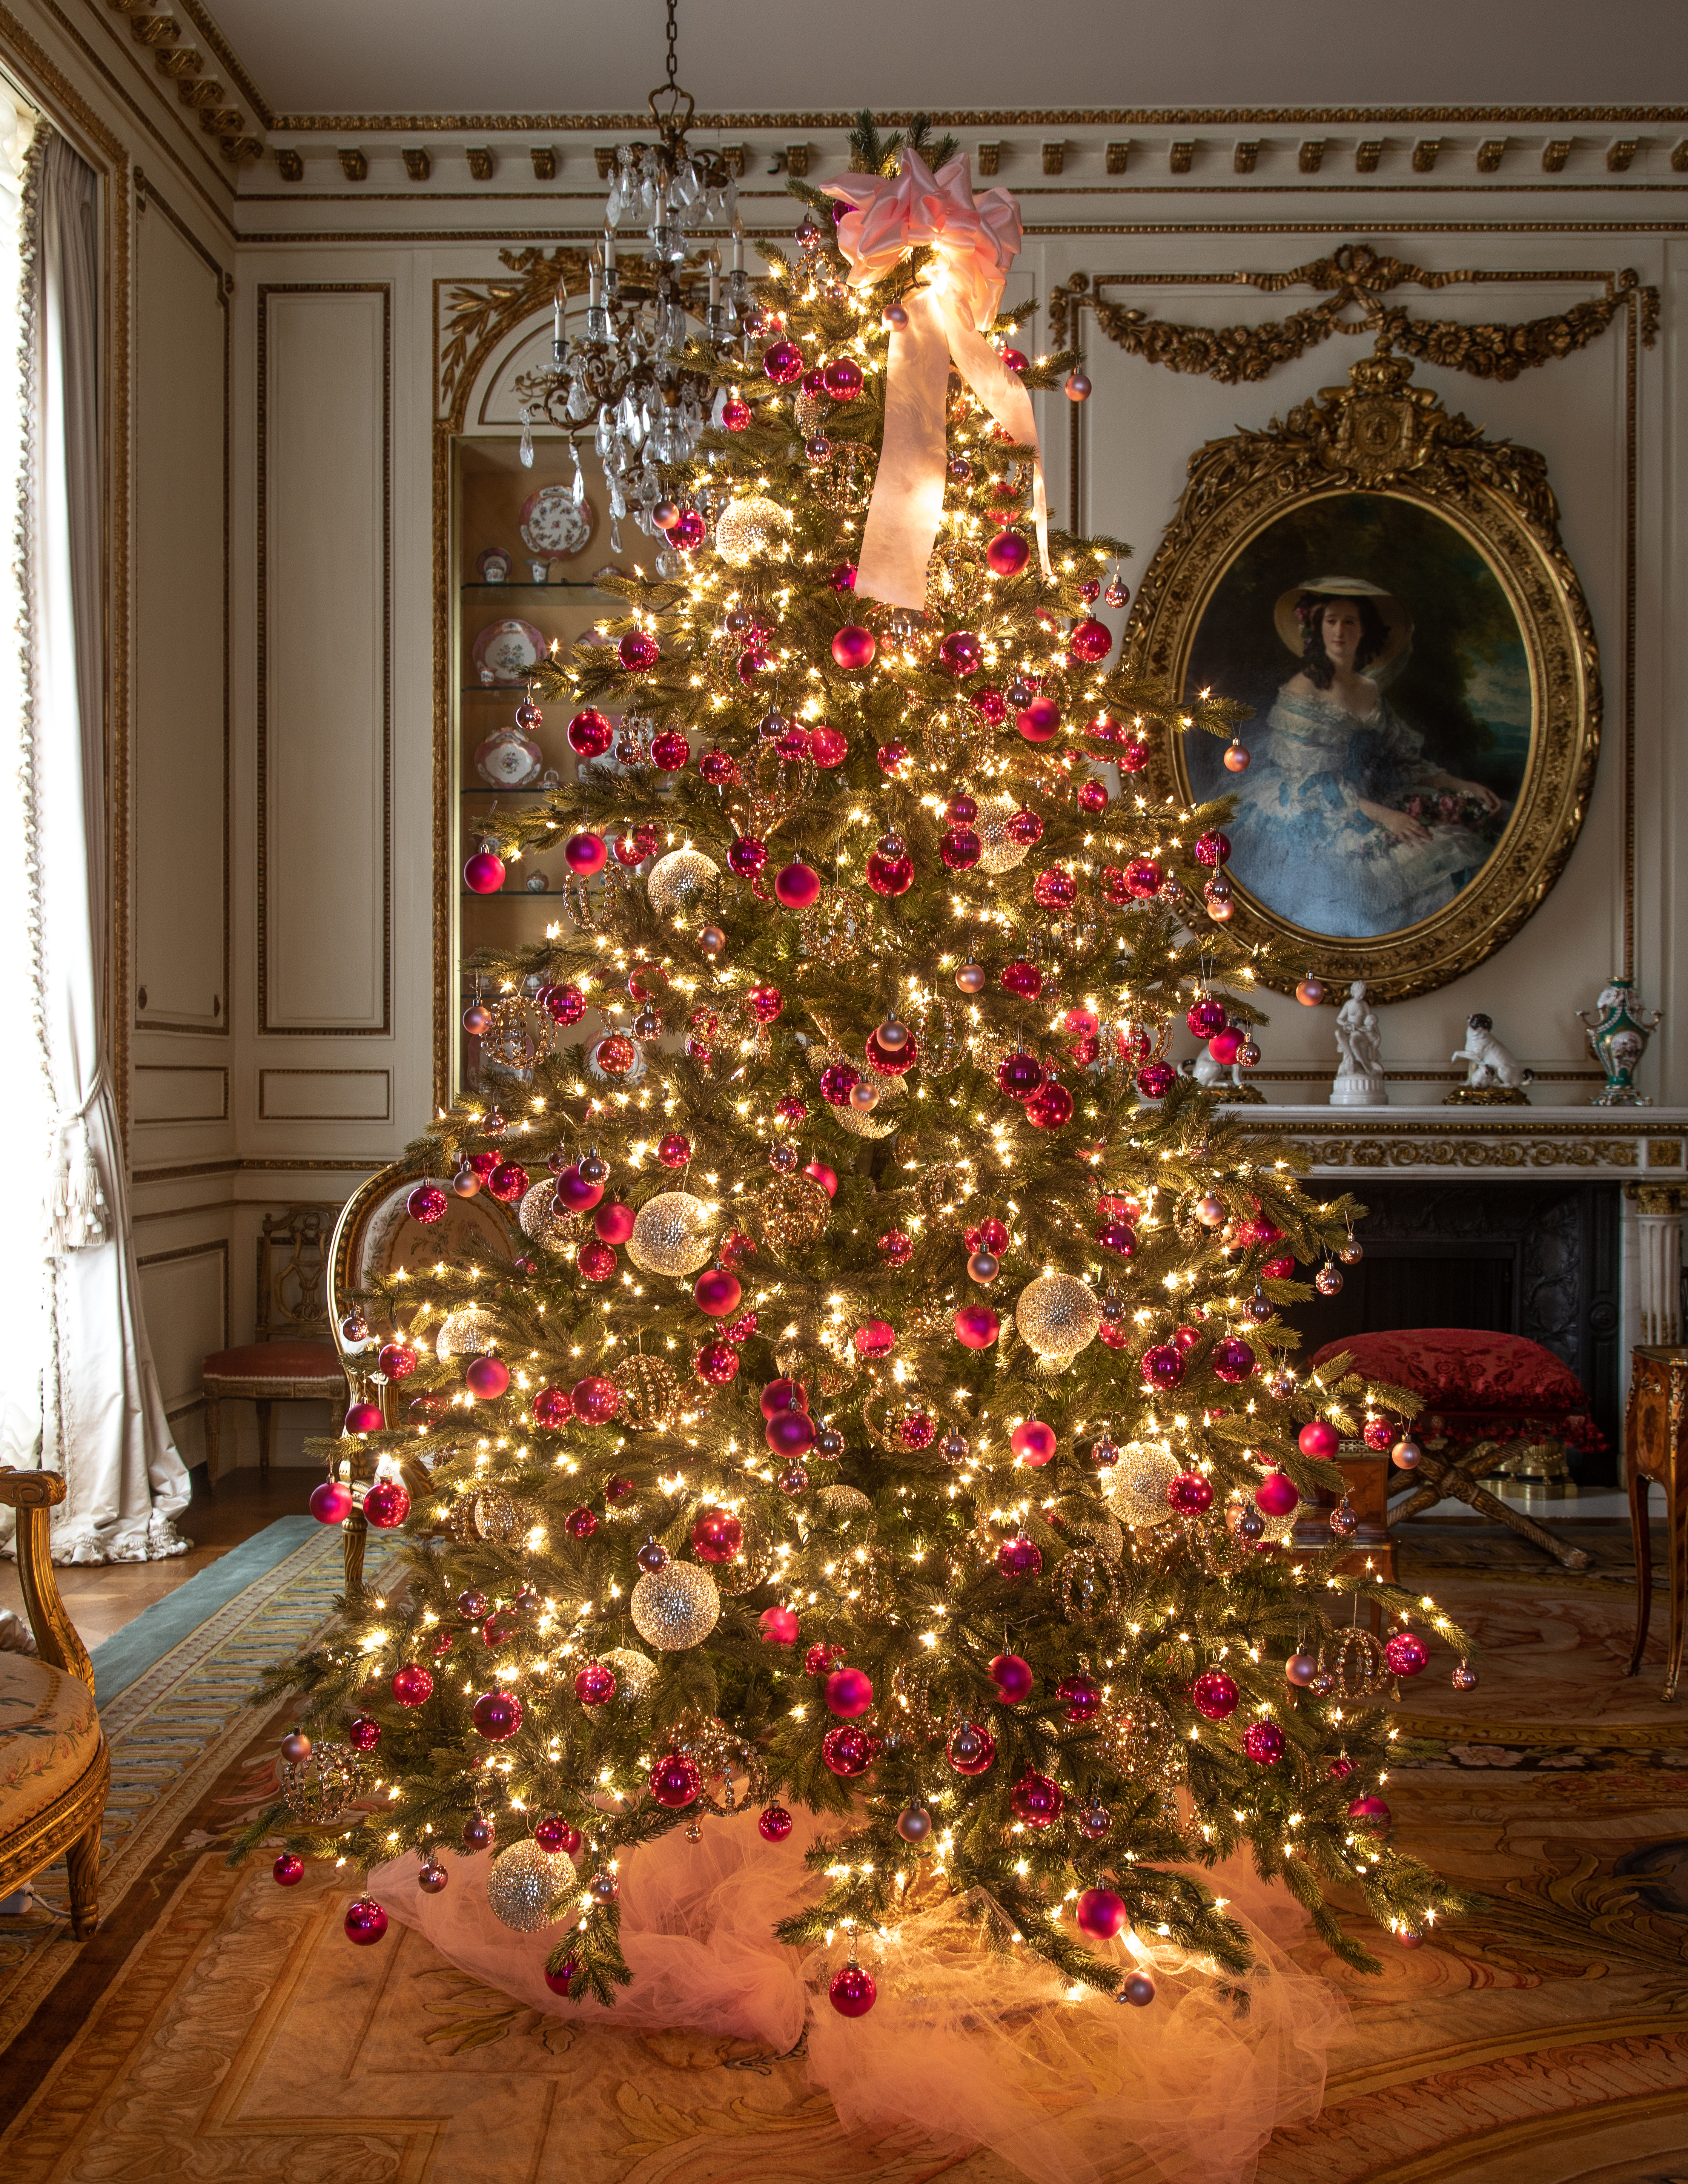 Image of Christmas Tree decorated with pink ornaments inside the mansion.